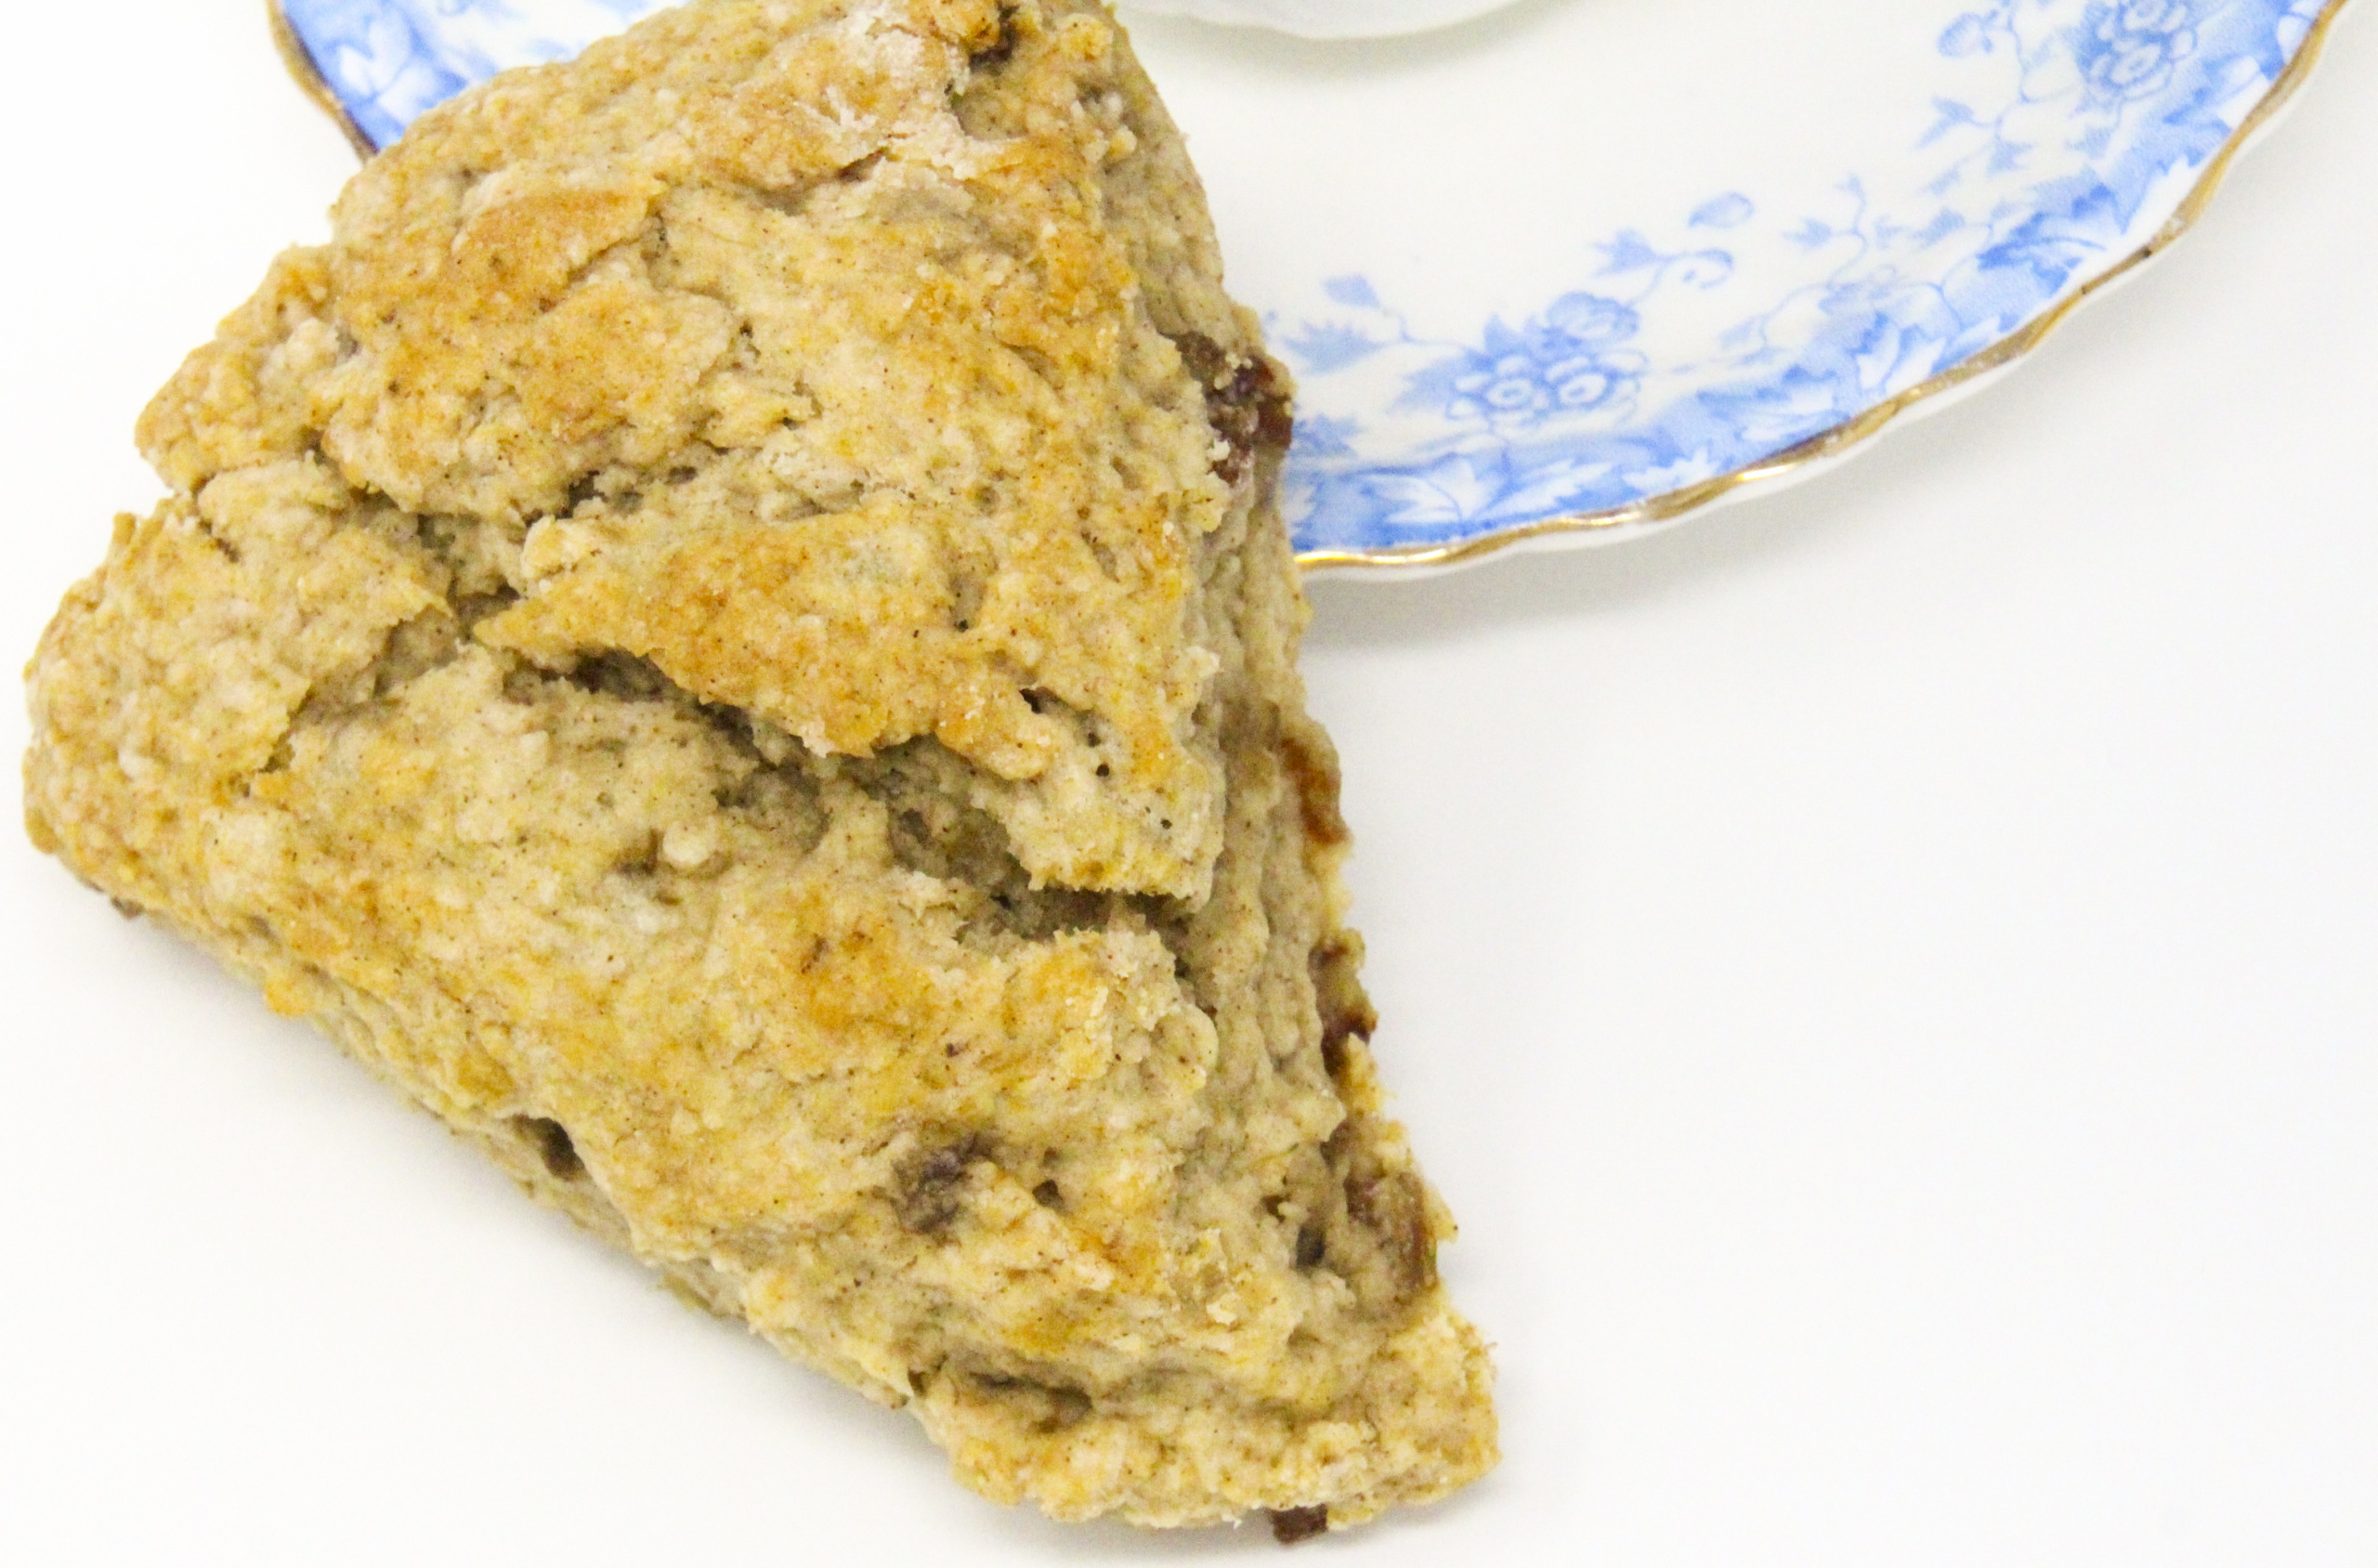 Instead of using a lot of sugar, Banana Date scones rely on a banana and dates for extra sweetness. This rich and flaky pastry only needs a pat of creamy butter and a cup of tea for a delicious breakfast or snack! Recipe shared with permission granted by Lucy Burdette, author of A SCONE OF CONTENTION.